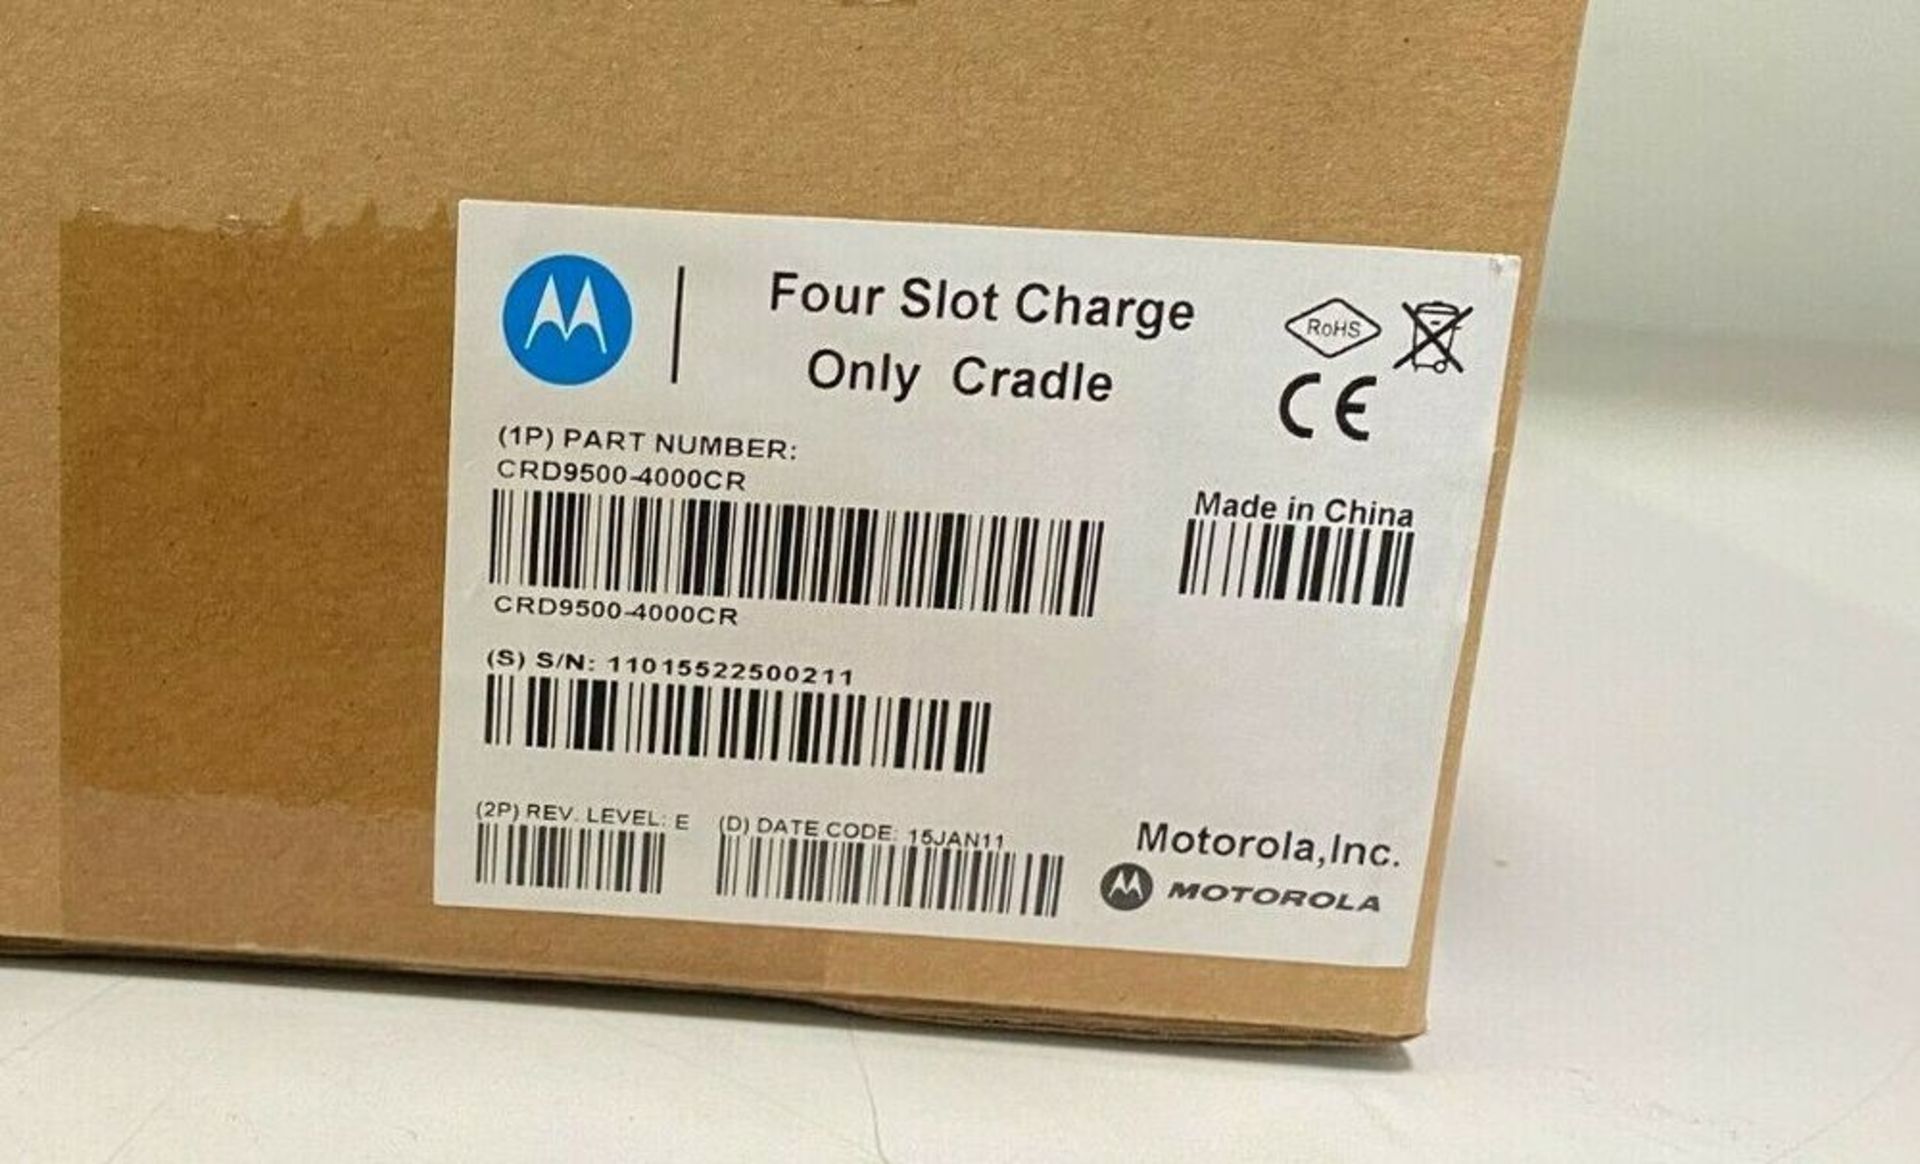 Motorola CRD-9500-4000CR Four Slot Charge Only Cradle - Battery Charger - Image 8 of 8